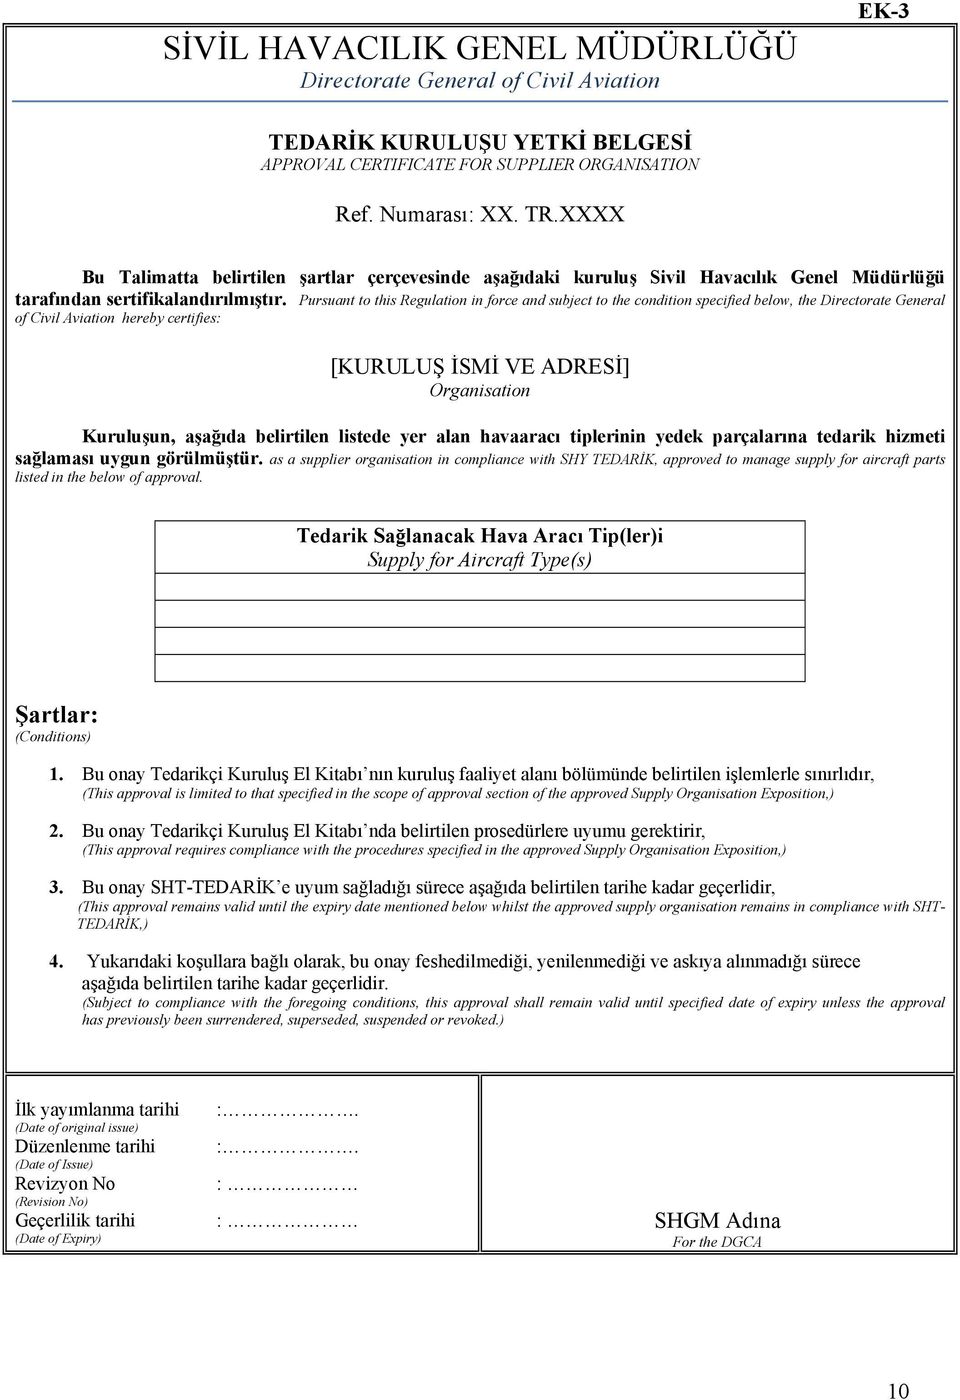 Pursuant to this Regulation in force and subject to the condition specified below, the Directorate General of Civil Aviation hereby certifies: [KURULUŞ İSMİ VE ADRESİ] Organisation Kuruluşun, aşağıda